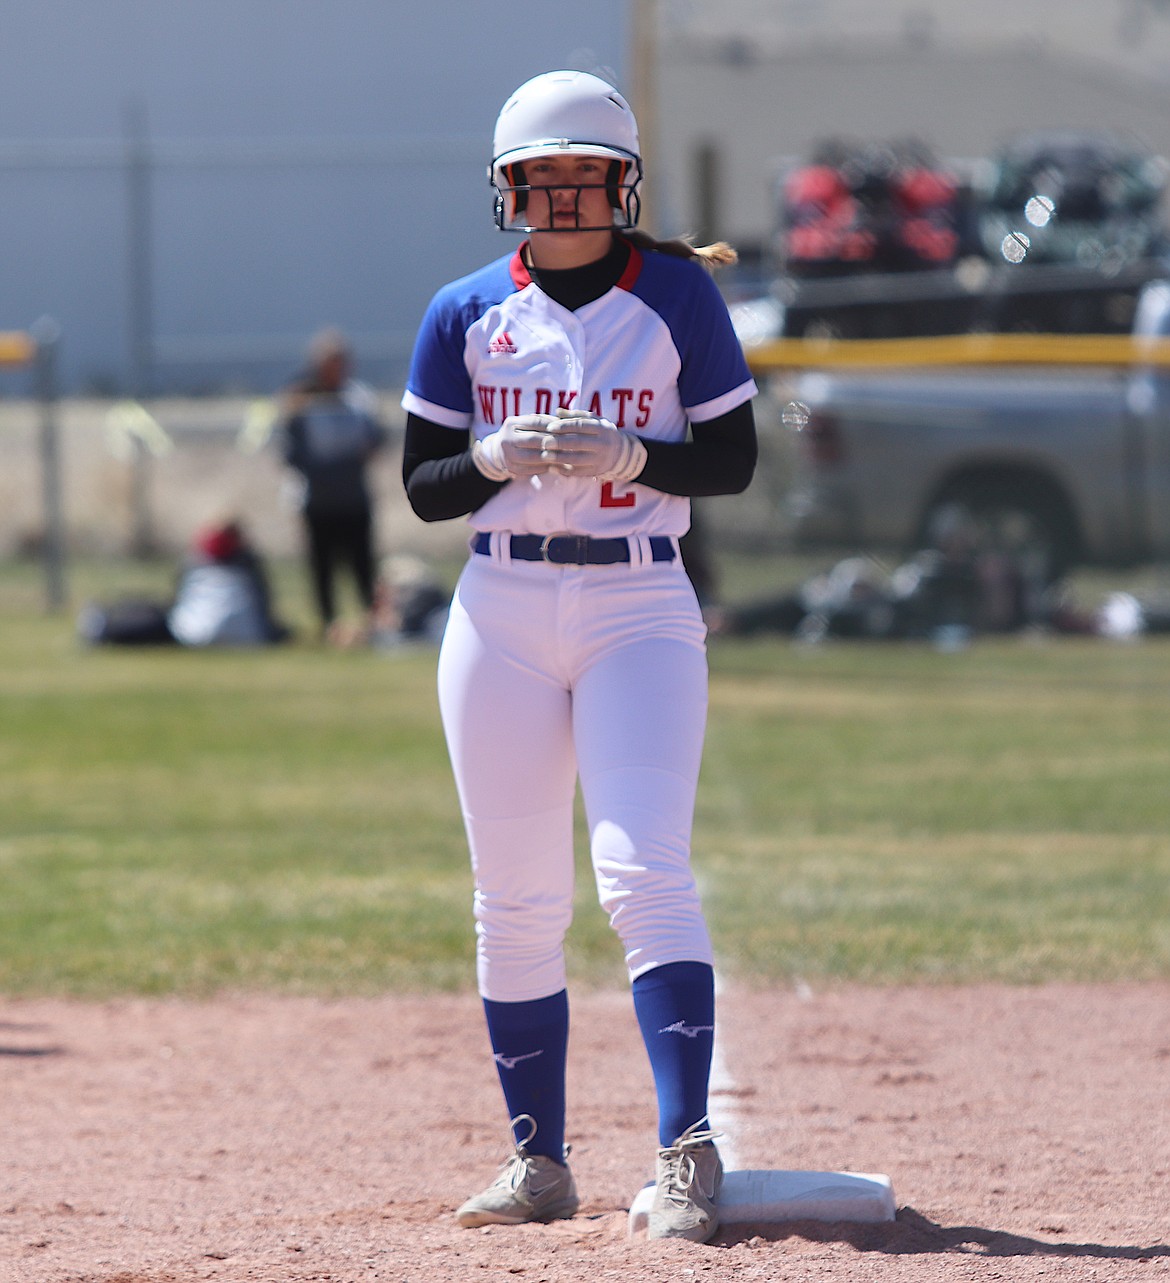 Aletheia Fisher is hitting .429 for the Columbia Falls Wildkats, who take a 17-3 record into Saturday’s Northwest A showdown with Polson (photo courtesy Bill Foley, Buttesports.com)